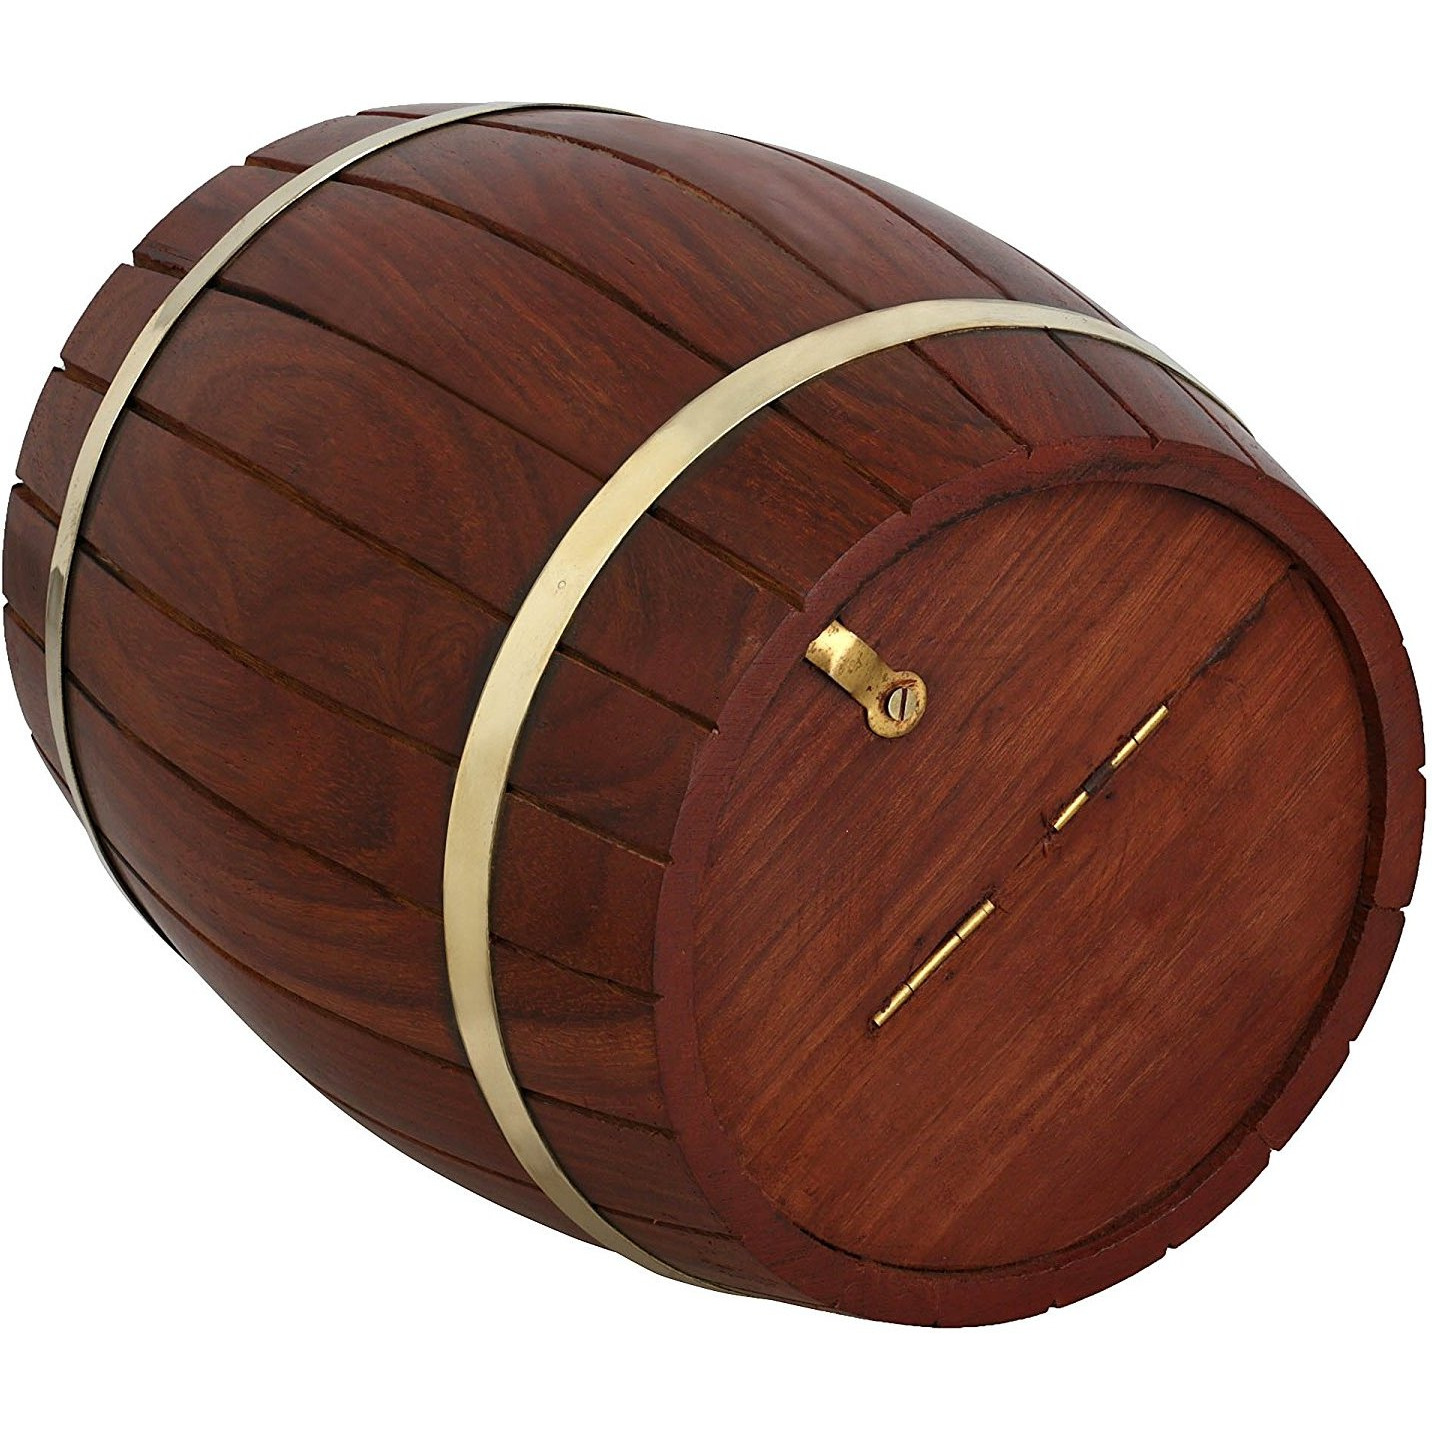 Handcrafted Indian Wooden Barrel Money Bank for Kids - Brass Accents and Coin Slot - Measures 7 Inches